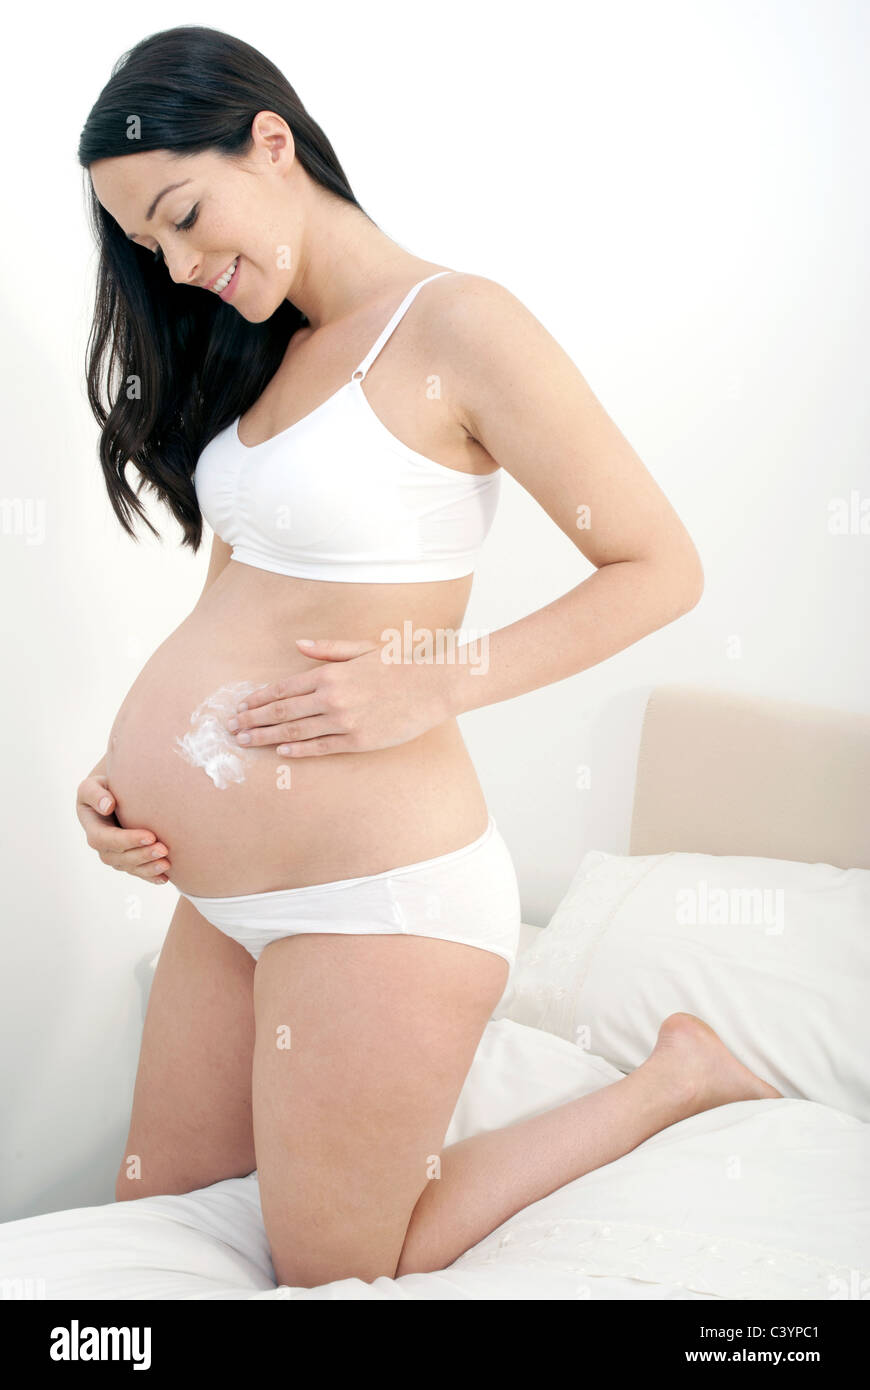 Pregnant woman apply cream to her growing bump Stock Photo